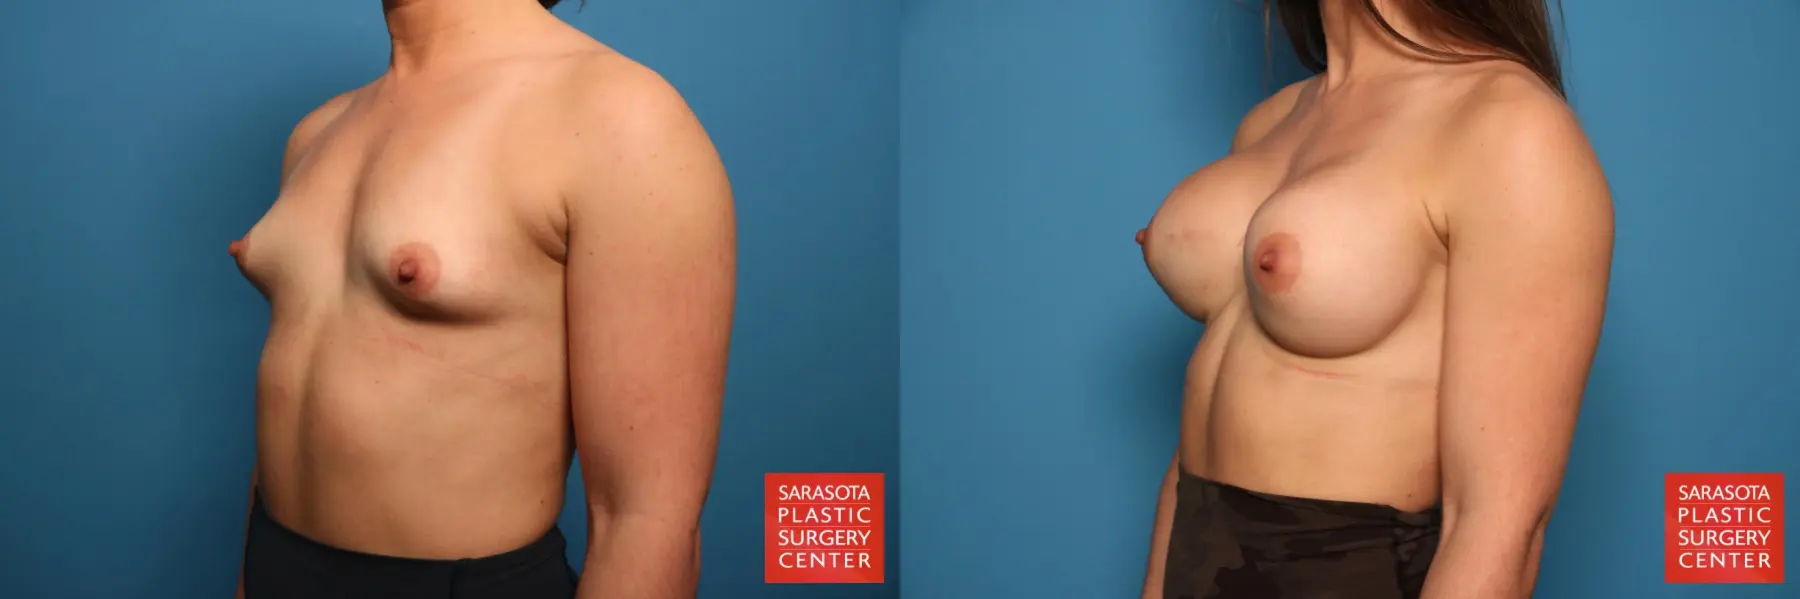 Breast Augmentation: Patient 64 - Before and After 2